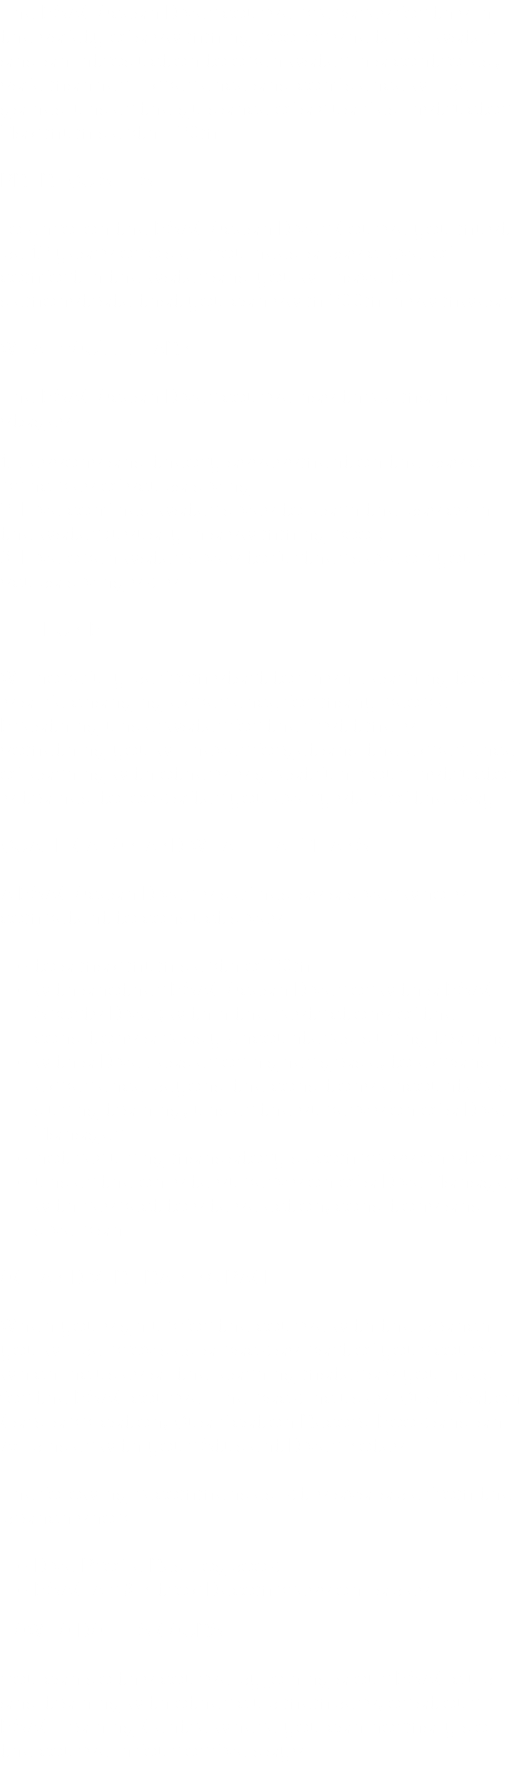 The BSAC Ocean Diver course prepares for this in the safety of a swimming pool or sheltered water and an introduction to open water in a controlled, safe manner. Experience and confidence will be gained under the guidance of a qualified instructor. Maximum depth - 20m. PREREQUISITES To enrol on the BSAC Ocean Diver Course you must be 12 years or older. You need a basic level of comfort in the water and you will have to demonstrate that you can swim 200m in swimwear. What you’ll learn The BSAC Ocean Diver course has three main stages: 1. Lessons and theory assessment on the basic principles of scuba diving 2. Five confined water dives to learn the basics in the water (usually in a swimming pool) 3. Five open water dives to further develop your scuba diving skills The fun bit Will hopefully be from start to finish! Learning to dive is a life changing experience for many people. Breathing underwater for the first time is something you will never forget and the experience of learning with others is great fun. Your instructor is trained to look after you every step of the way. Qualification and what that means A BSAC Ocean Diver is defined as a diver who is competent to conduct dives: to a maximum depth of 20m. with another BSAC Ocean Diver or with a BSAC Sports Diver, within the restrictions of the conditions already encountered during training. with a Dive Leader or higher grade, to expand experience beyond the conditions encountered during training, under the supervision of a Dive Manager. not requiring mandatory decompression stops. under the on-site supervision of a Dive Manager with respect to site selection, conditions and dive plan. Ocean Diver Training Pack When you sign up for the course with the branch you will be provided a pack as part of your course which includes all the learning materials you need for the BSAC course. The pack includes: Qualification Card application, Qualification Record Book and an A5 binder with your Student Diver Notes. The following recommended kit is available from the branch shop: Dive Profile Red Logbook BSAC Air & Nitrox Decompression Tables How to do this course You can do this course by joining a our BSAC club and training with other club members, or at our BSAC Training Centre where you can normally do the course in four or five days. 